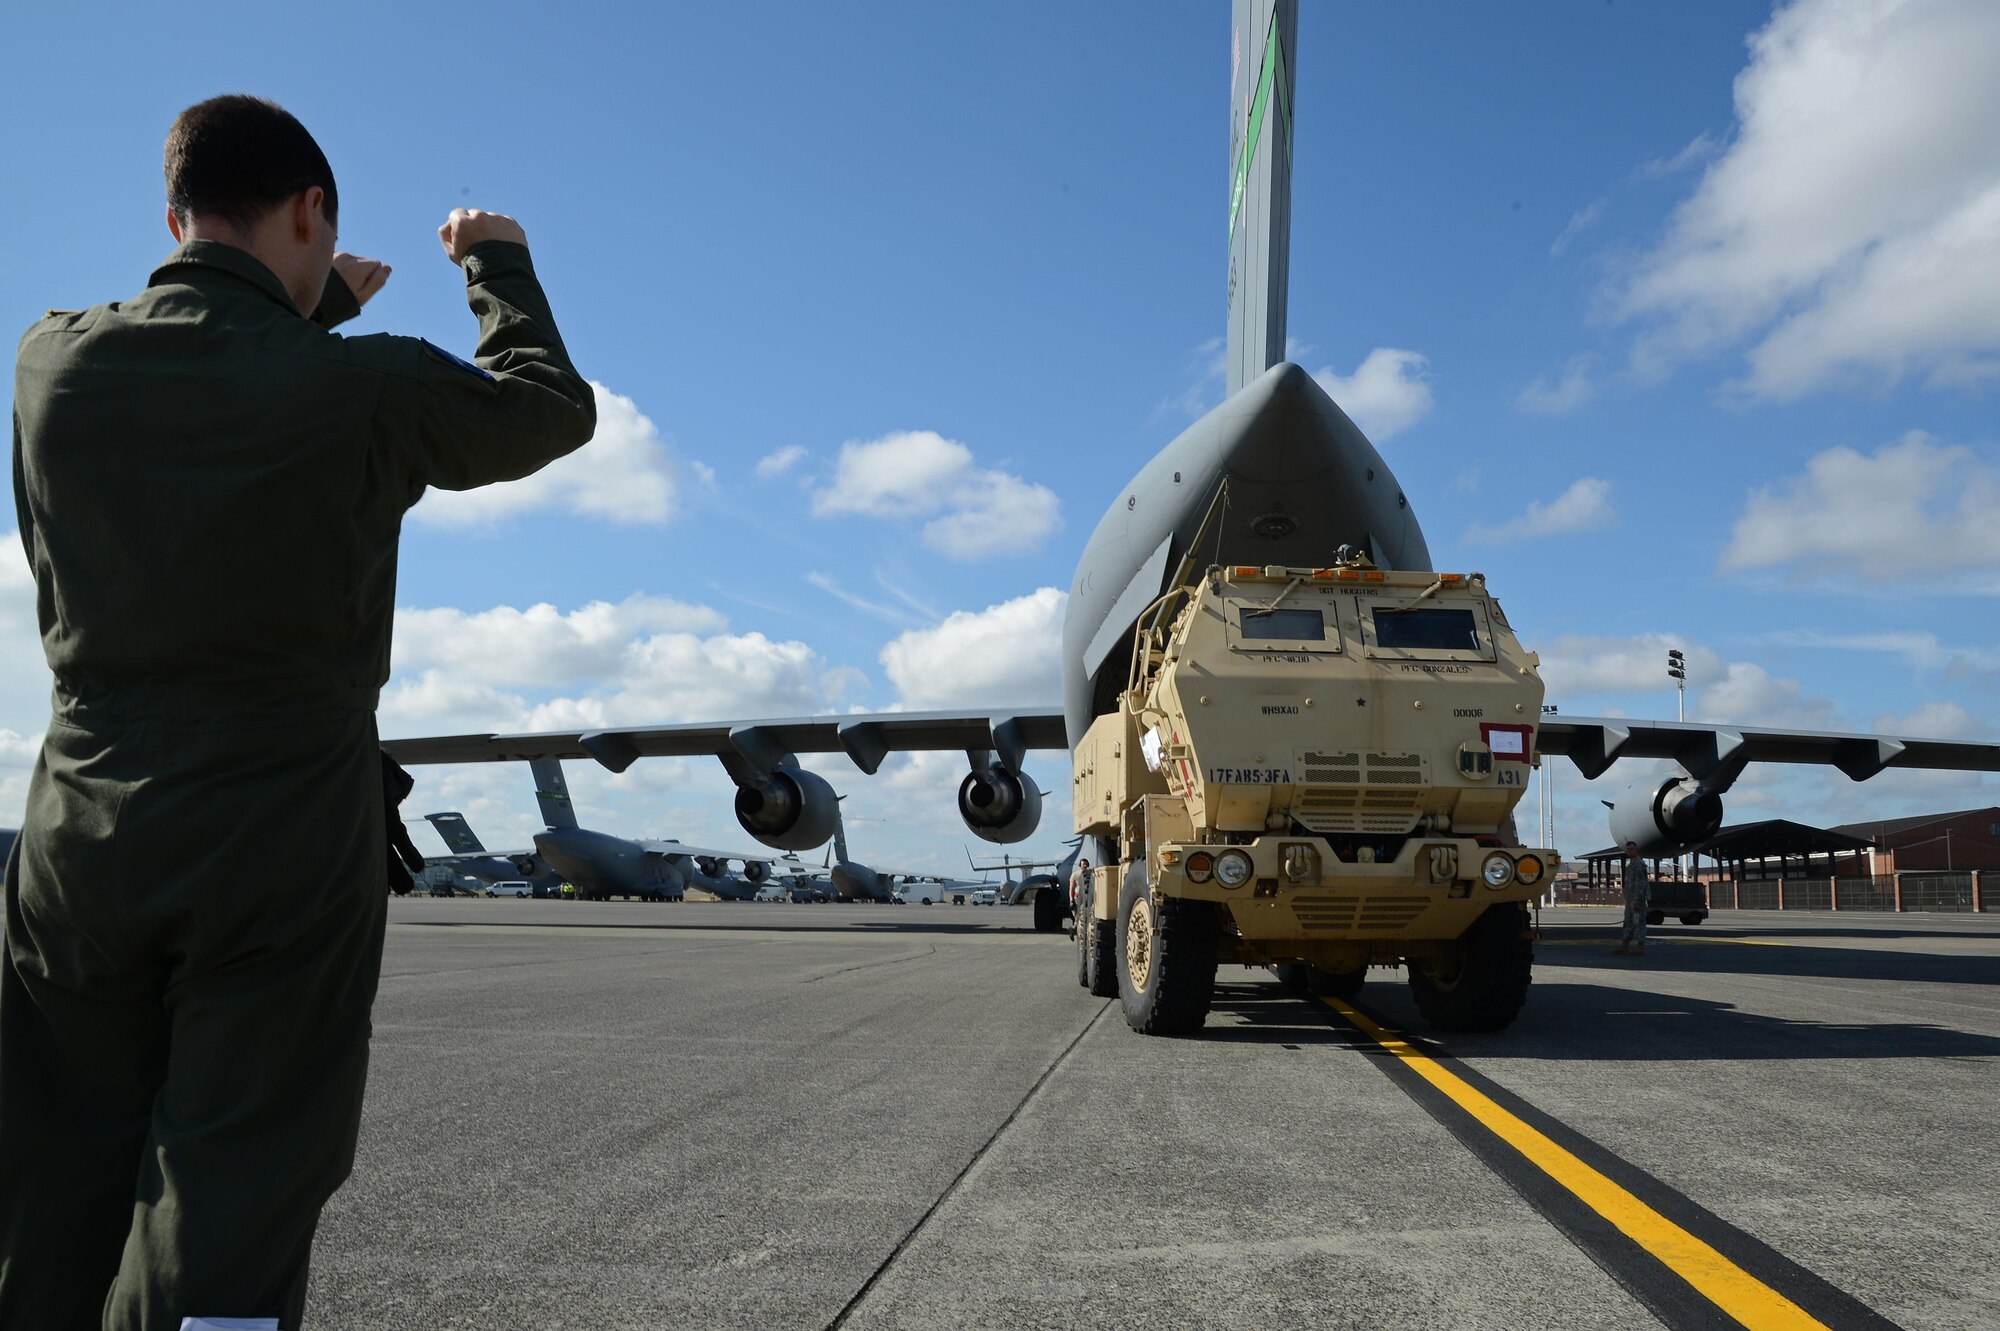 Senior Airman Patrick Bullard, 7th Airlift Squadron loadmaster, directs the crew of a High Mobility Artillery Rocket System as they load the vehicle onto a C-17 Globemaster III aircraft prior to a rapid infiltration HI-RAIN exercise June 22, 2016 at Joint Base Lewis-McChord, Wash. Each vehicle had to be carefully loaded to meet precise weight and balance standards for the aircraft. (U.S. Air Force photo/Senior Airman Jacob Jimenez) 